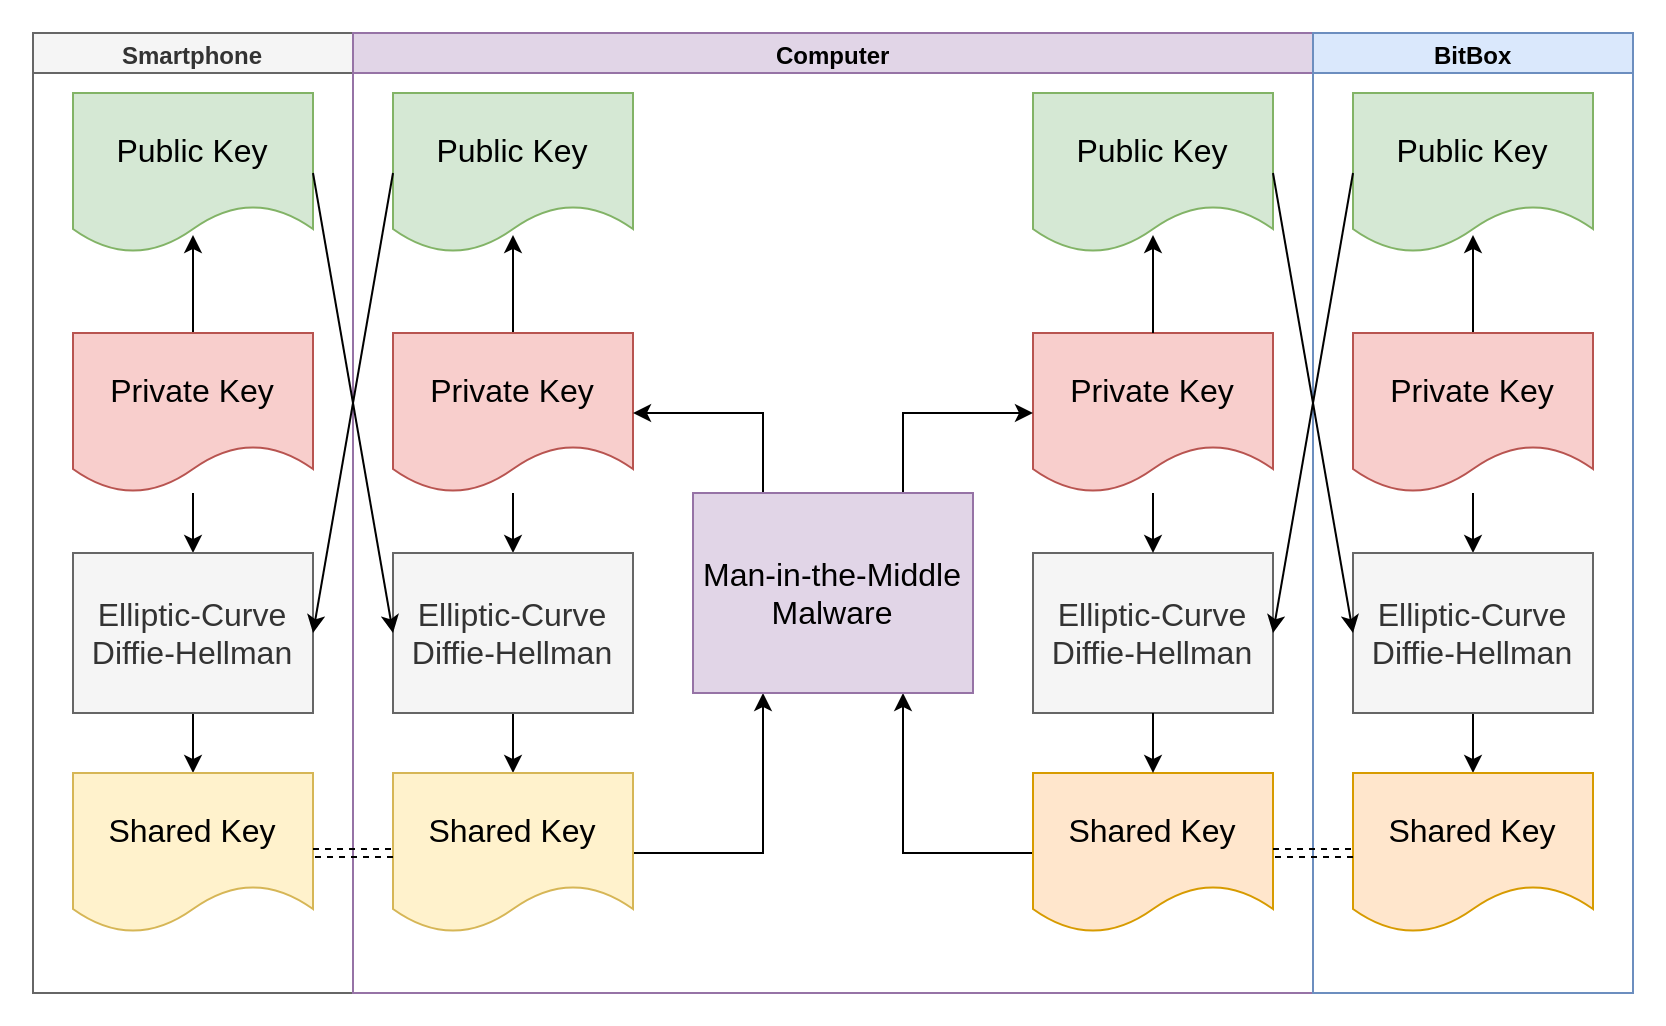 Flow chart illustrating the key exchange in the presence of Man-in-the-Middle malware